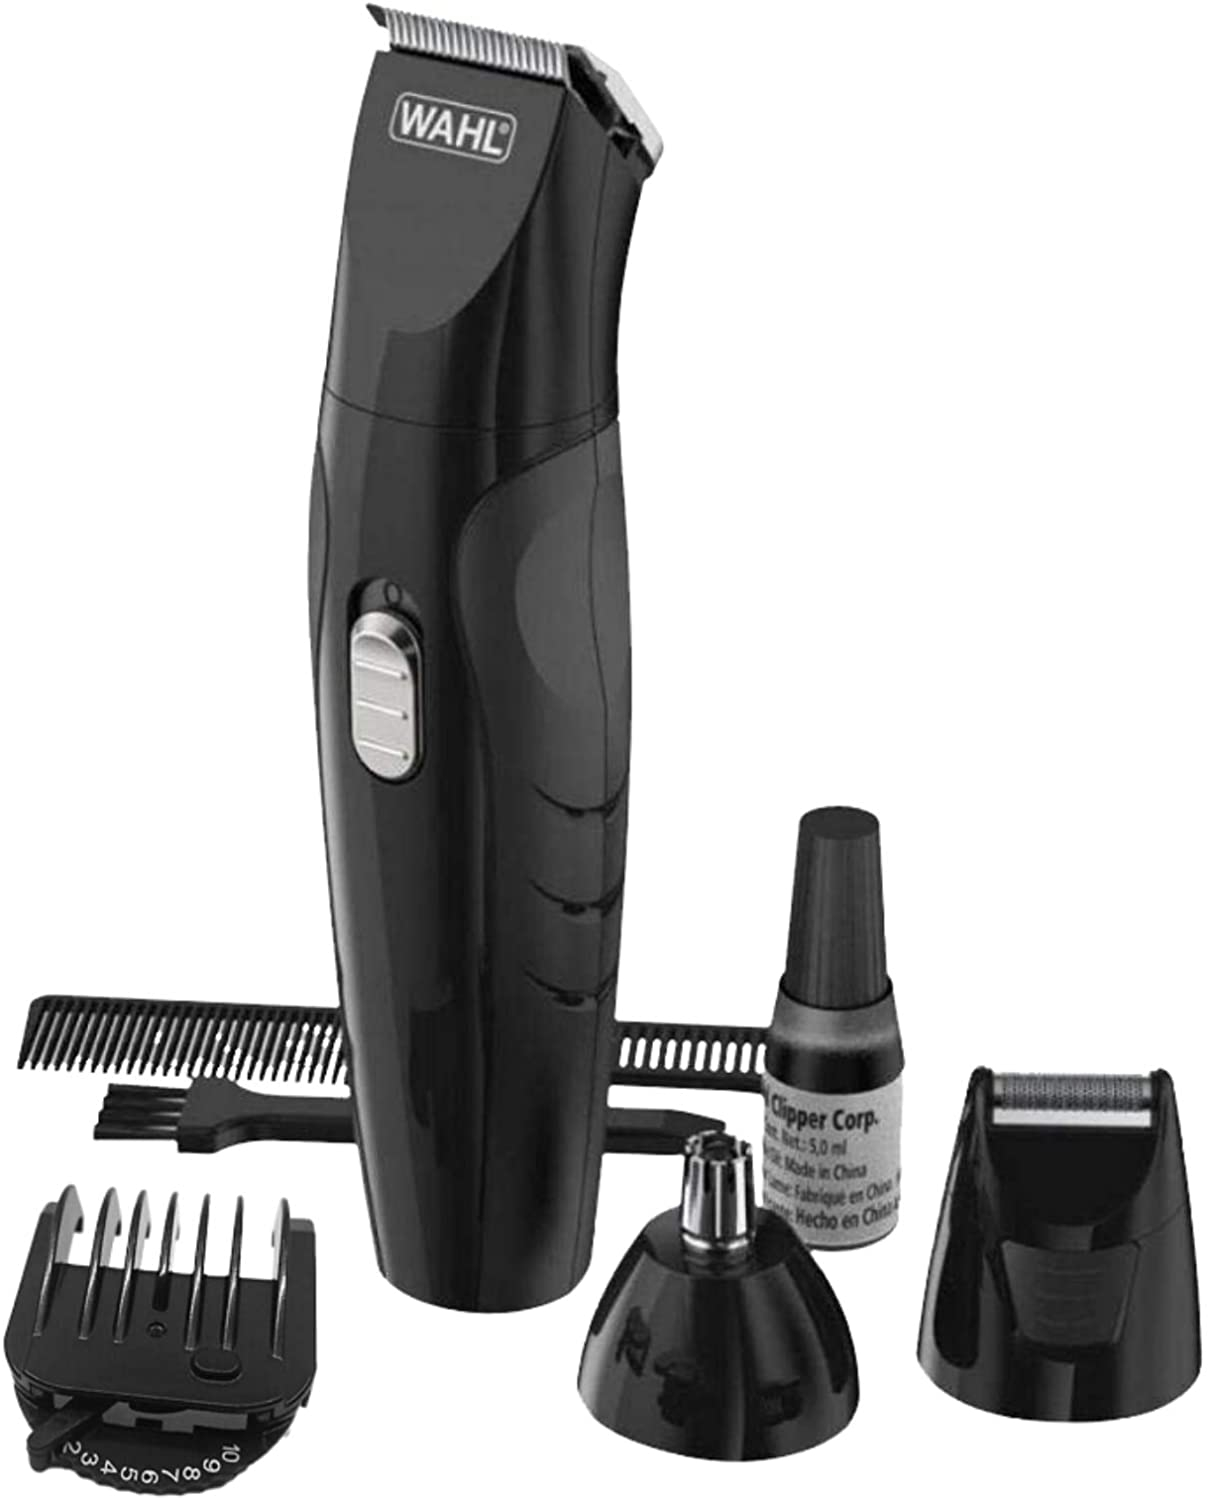 what clippers to use for a fade